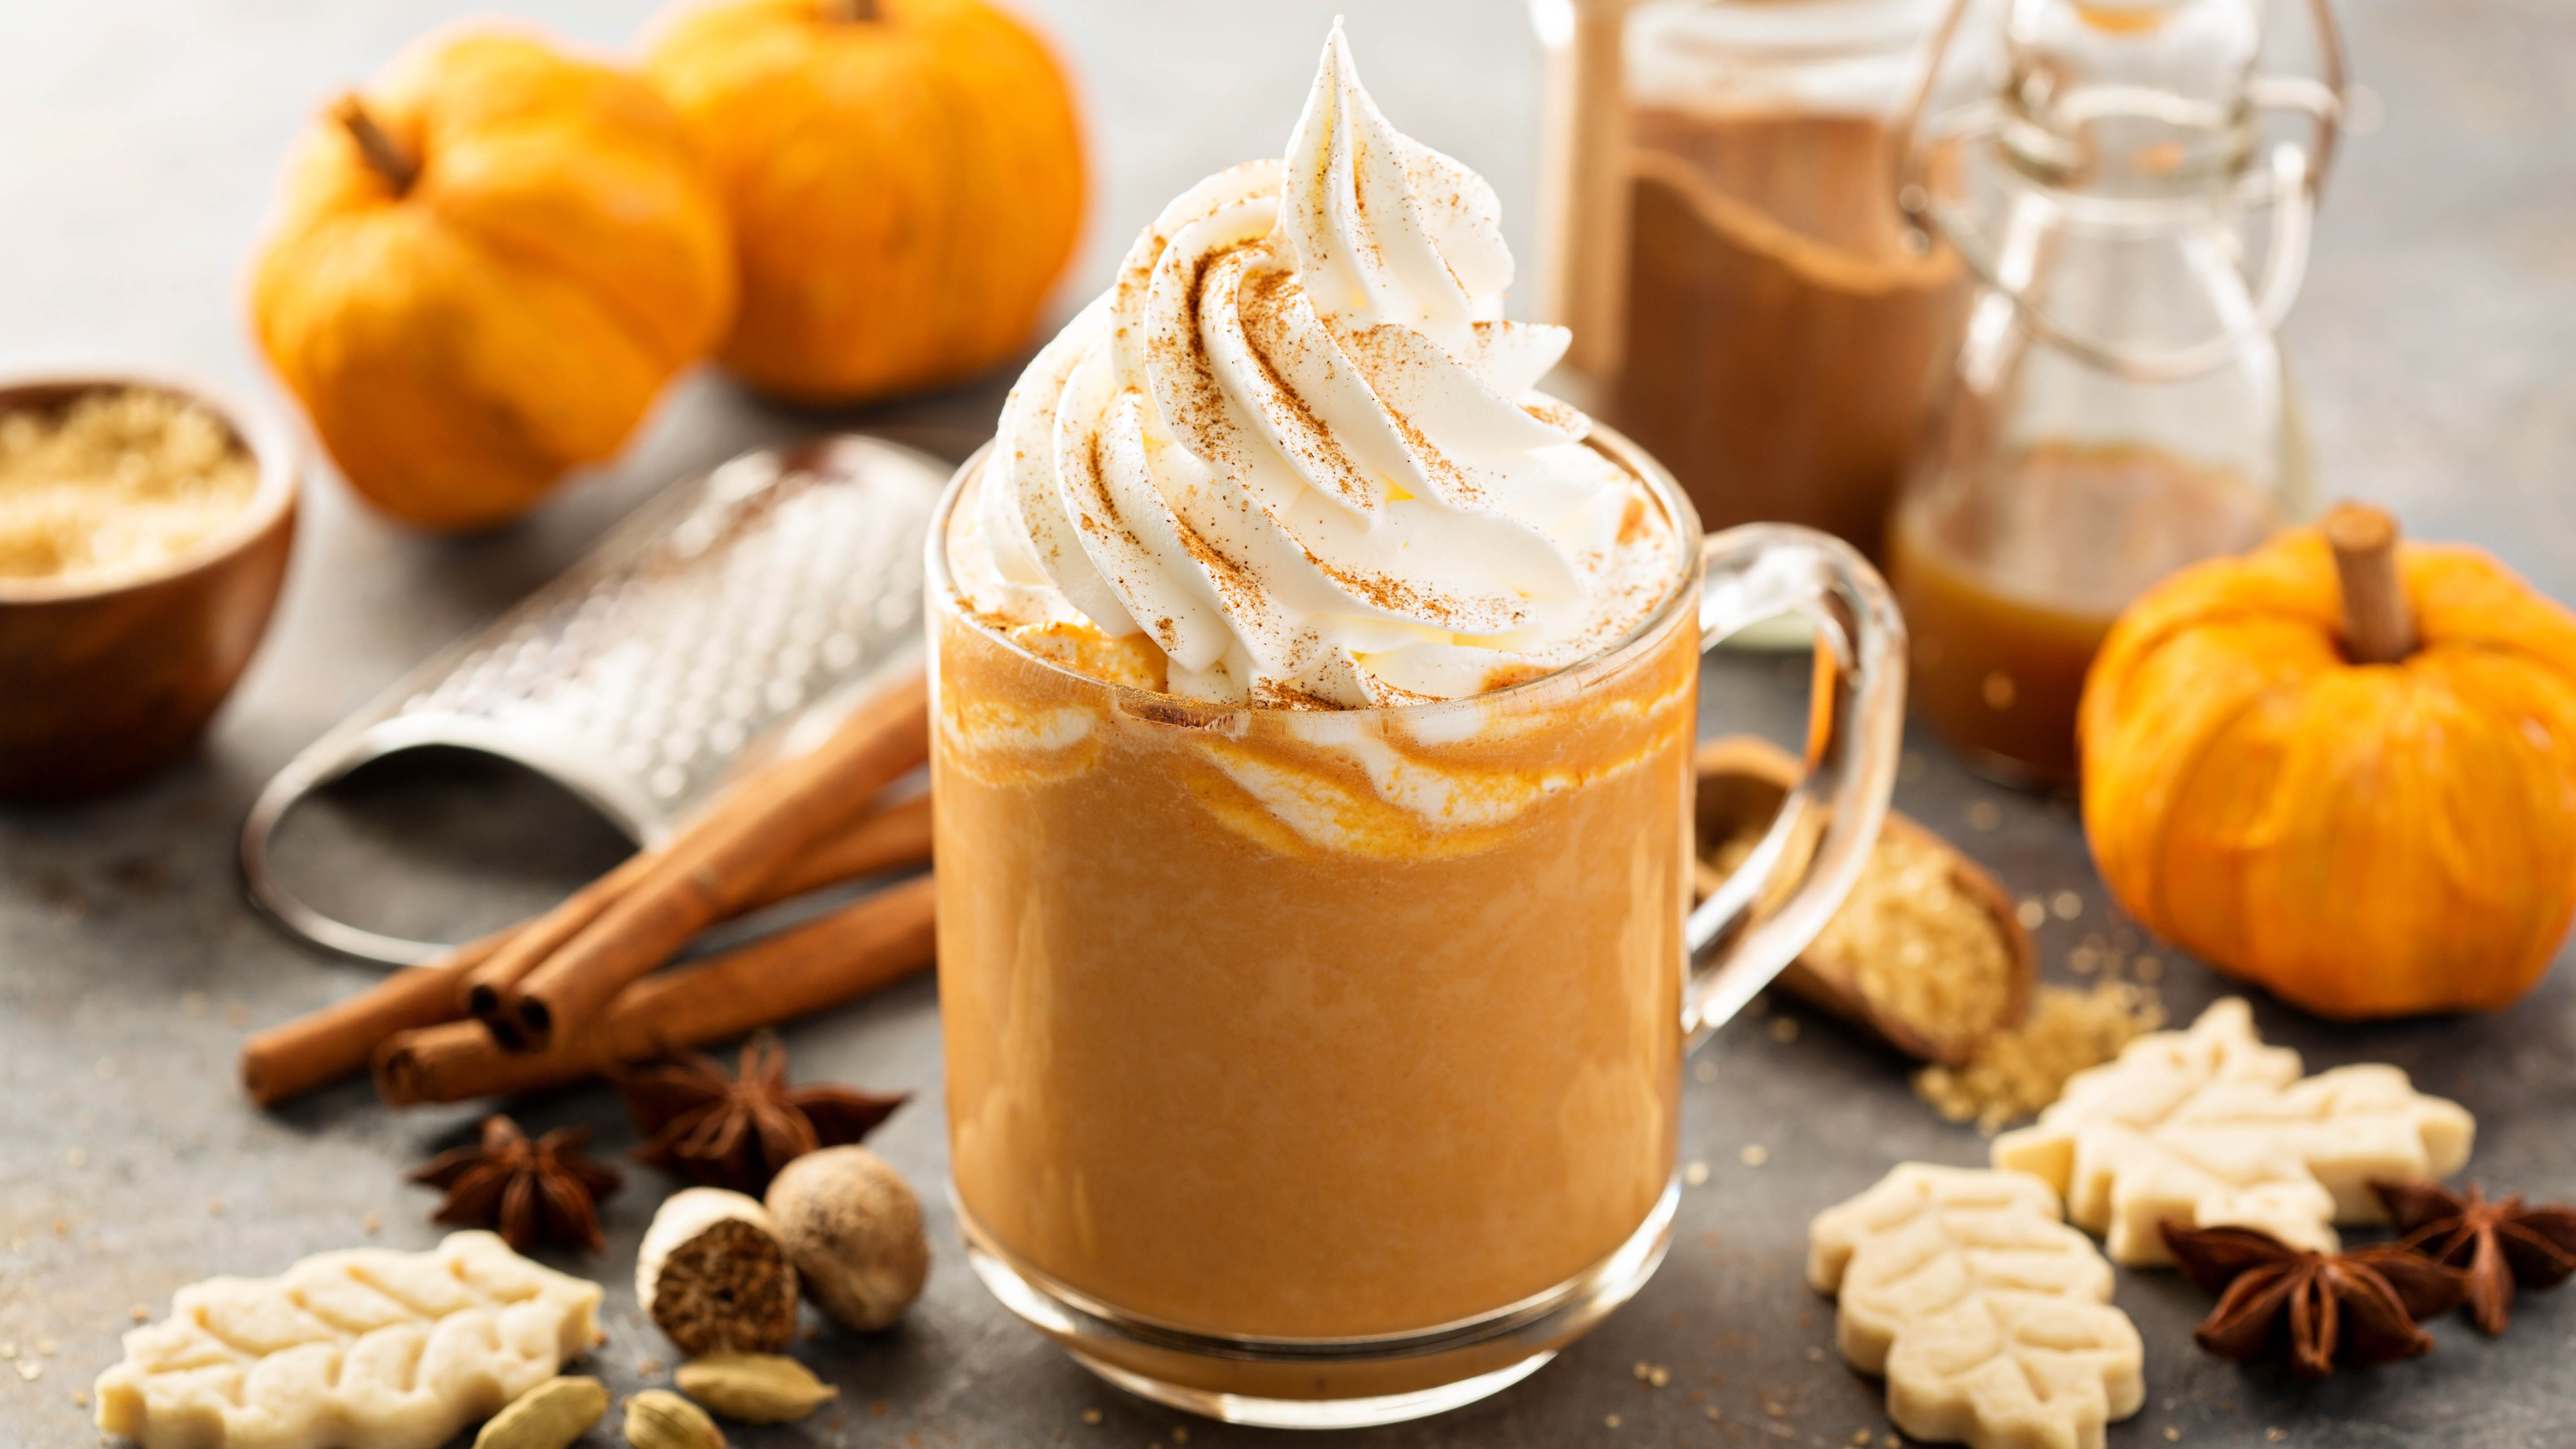 A pumpkin spiced latte in a glass jar with whipped cream on top